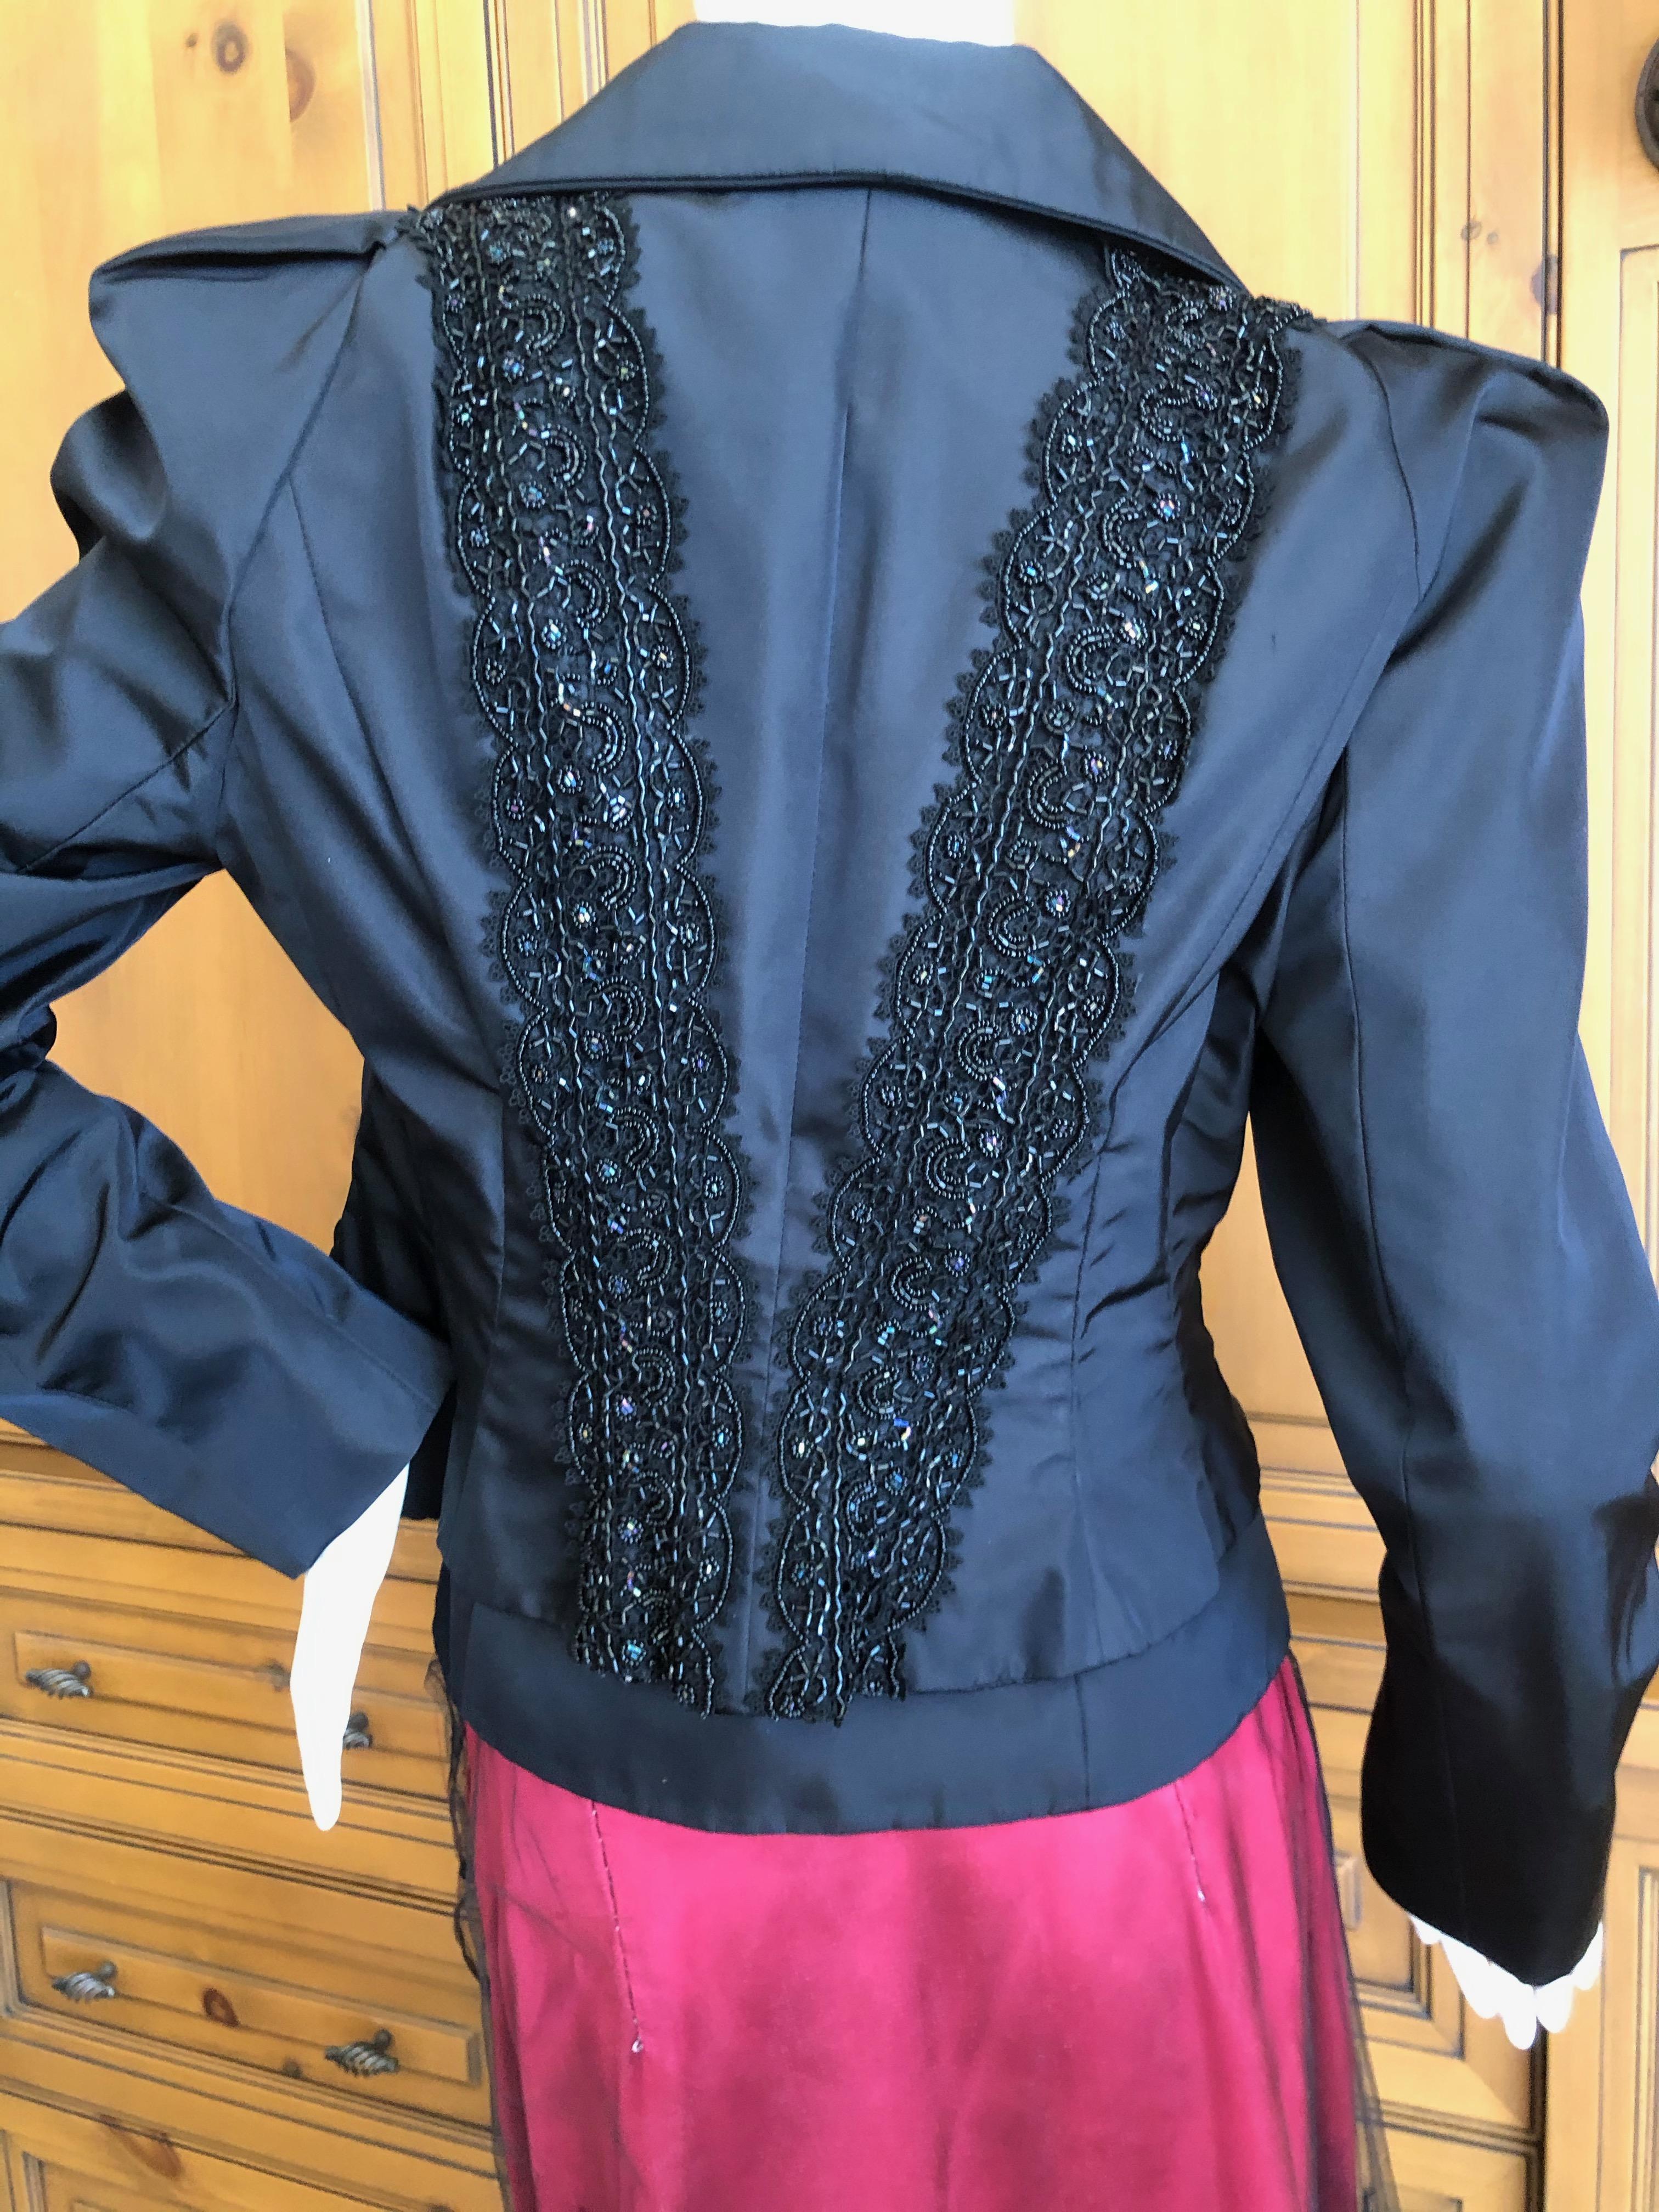 Christian Lacroix Vintage Black Beaded Evening Jacket from Autumn 1999 For Sale 2